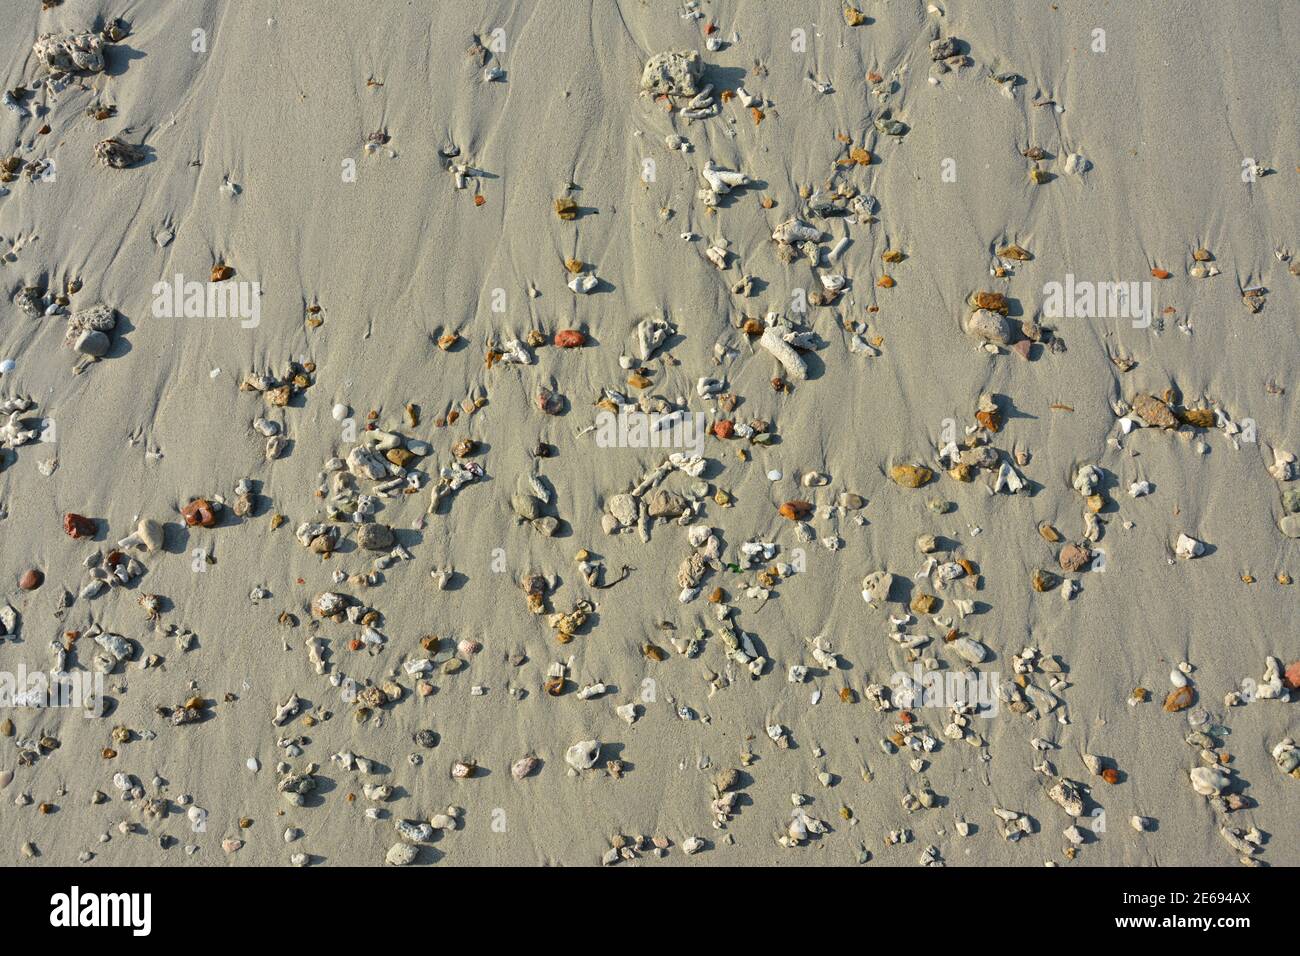 groups of small rocks on the sand beach in sunny day Stock Photo